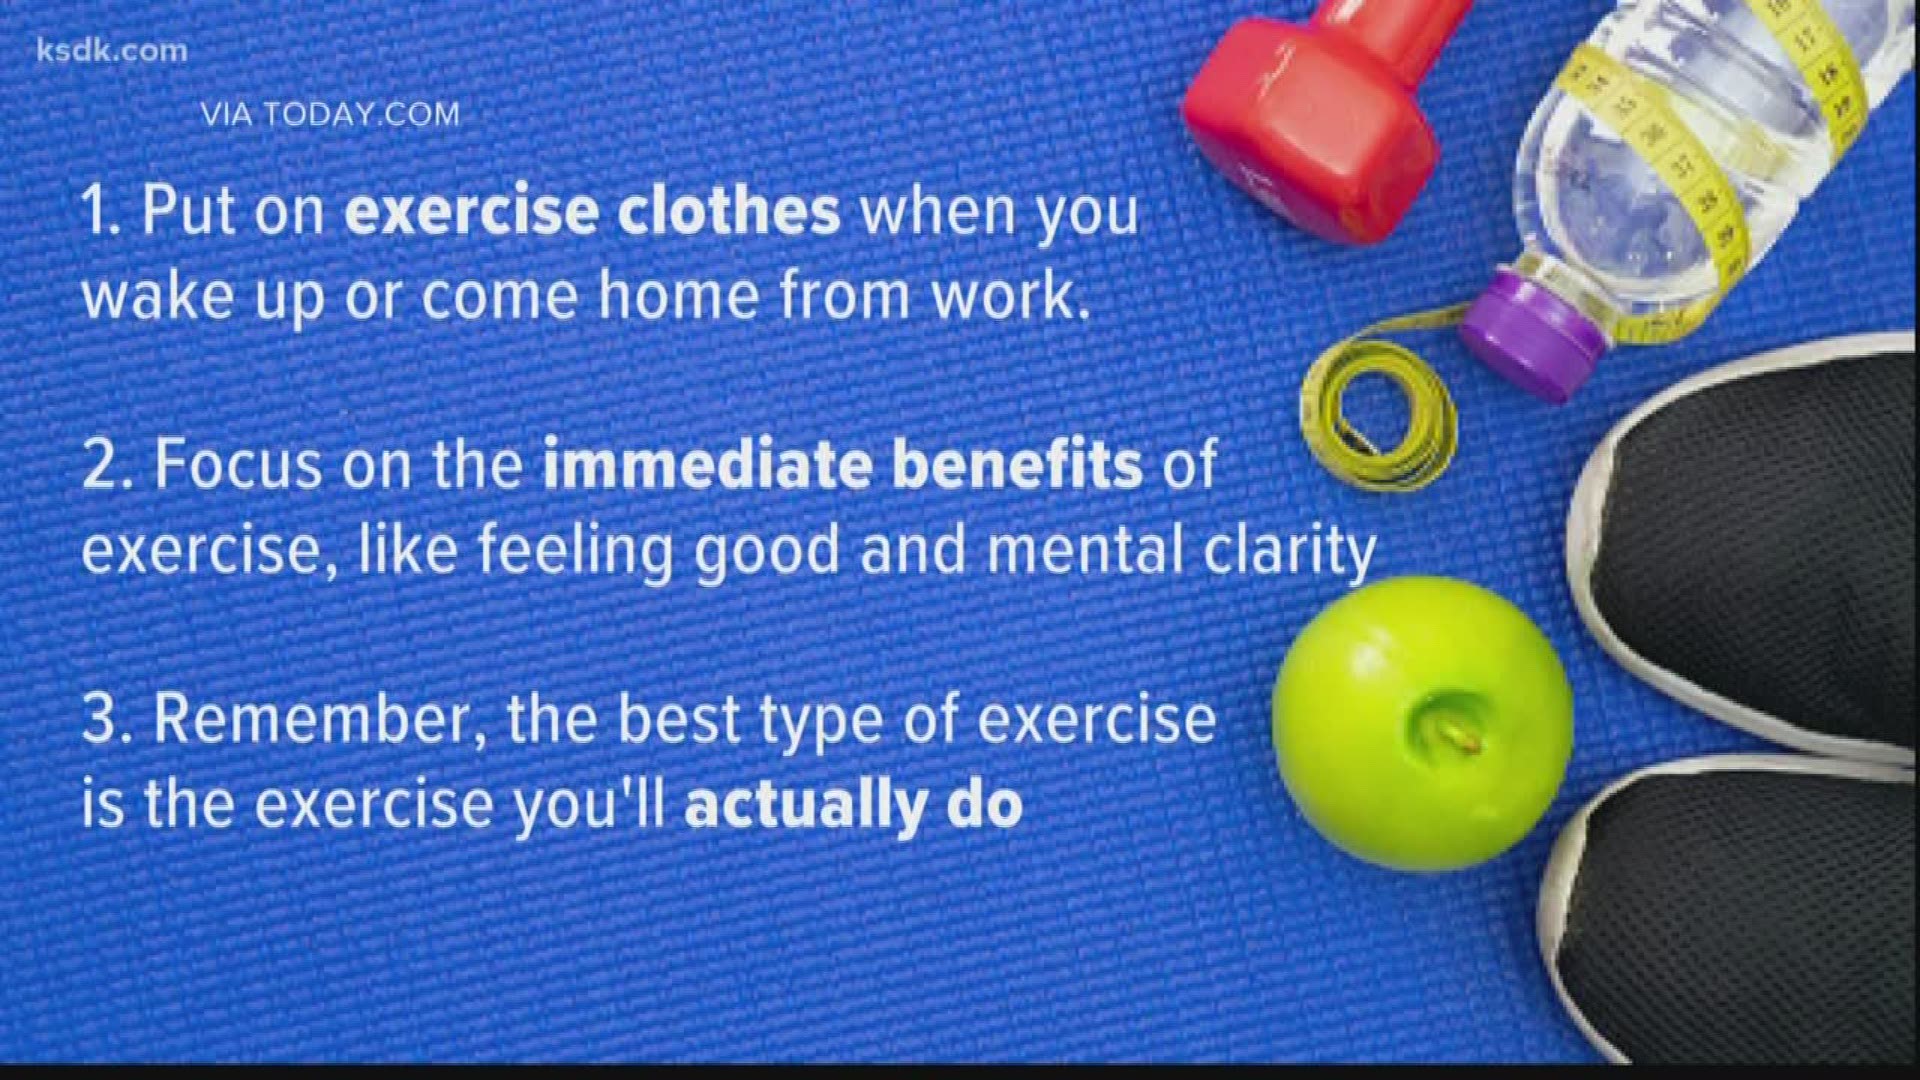 Here are some tips on keeping your fitness resolutions.